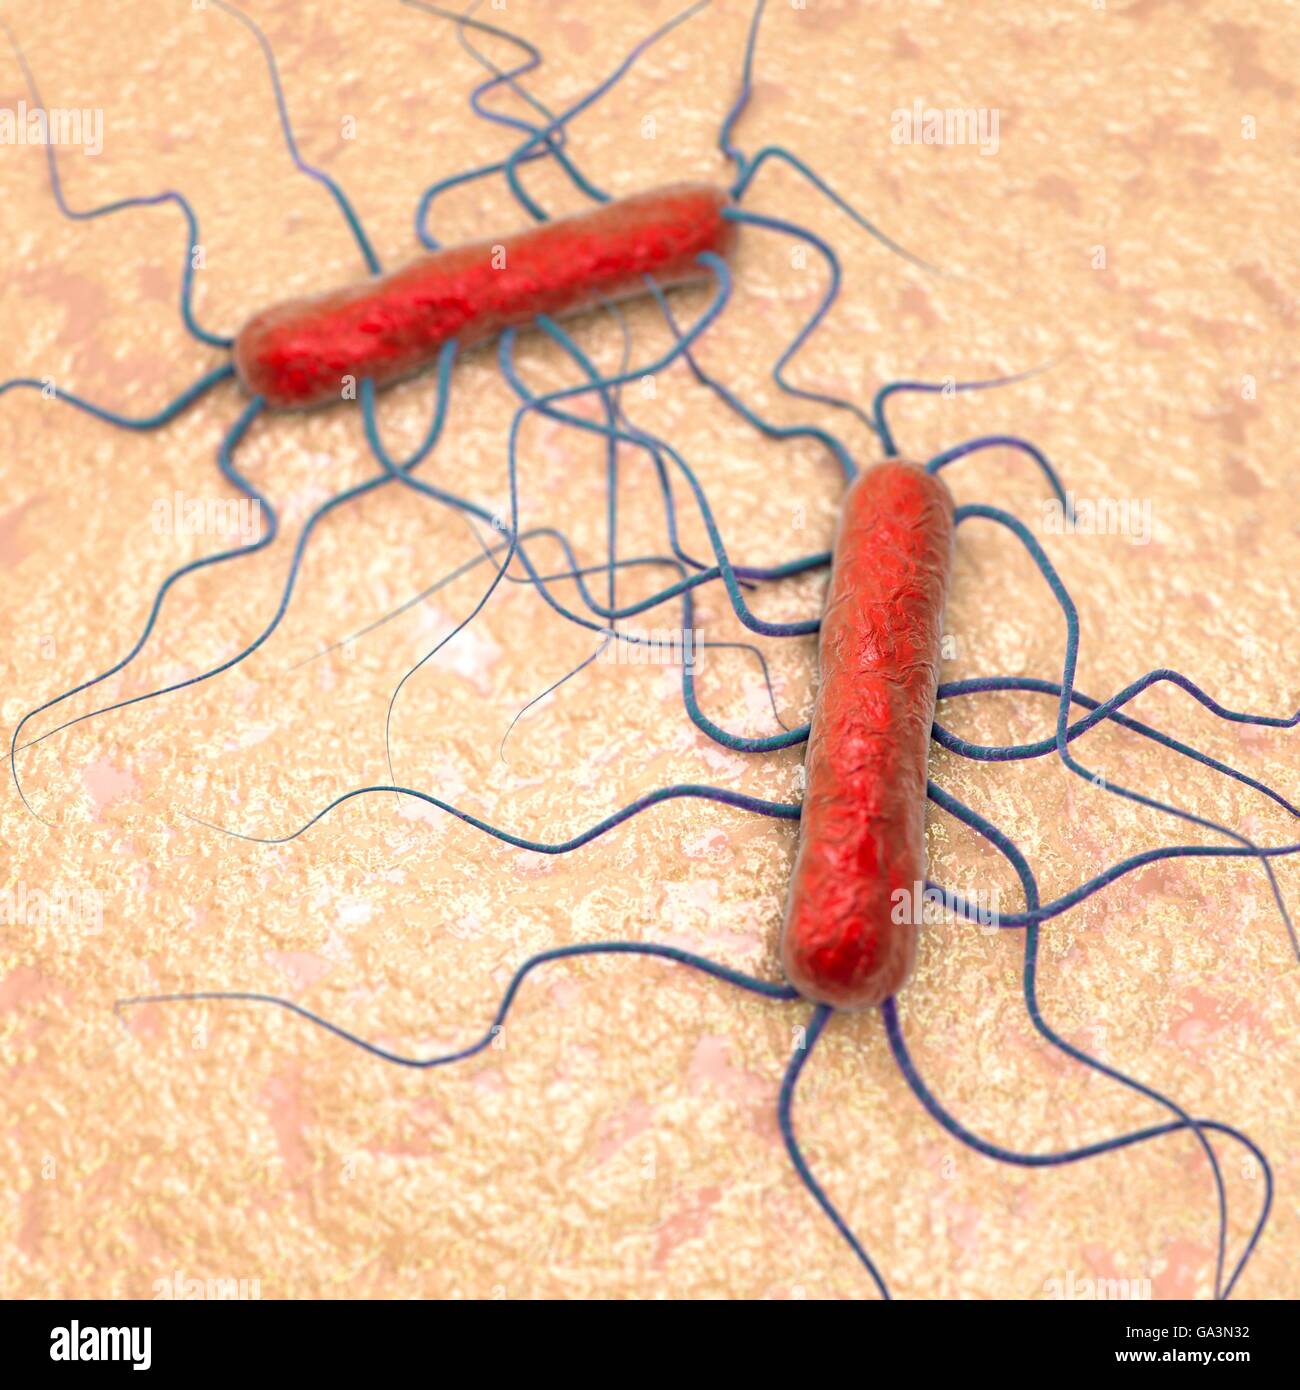 Listeria bacteria, computer illustration. Listeria are Gram-positive rod-shaped bacteria. The species L. monocytogenes is a human pathogen, causing the disease listeriosis. Symptoms of listeriosis include fever, meningitis and encephalitis (swelling of the brain). It is caught from contaminated food and is most common in newborns, the elderly and immunocompromised patients. Stock Photo